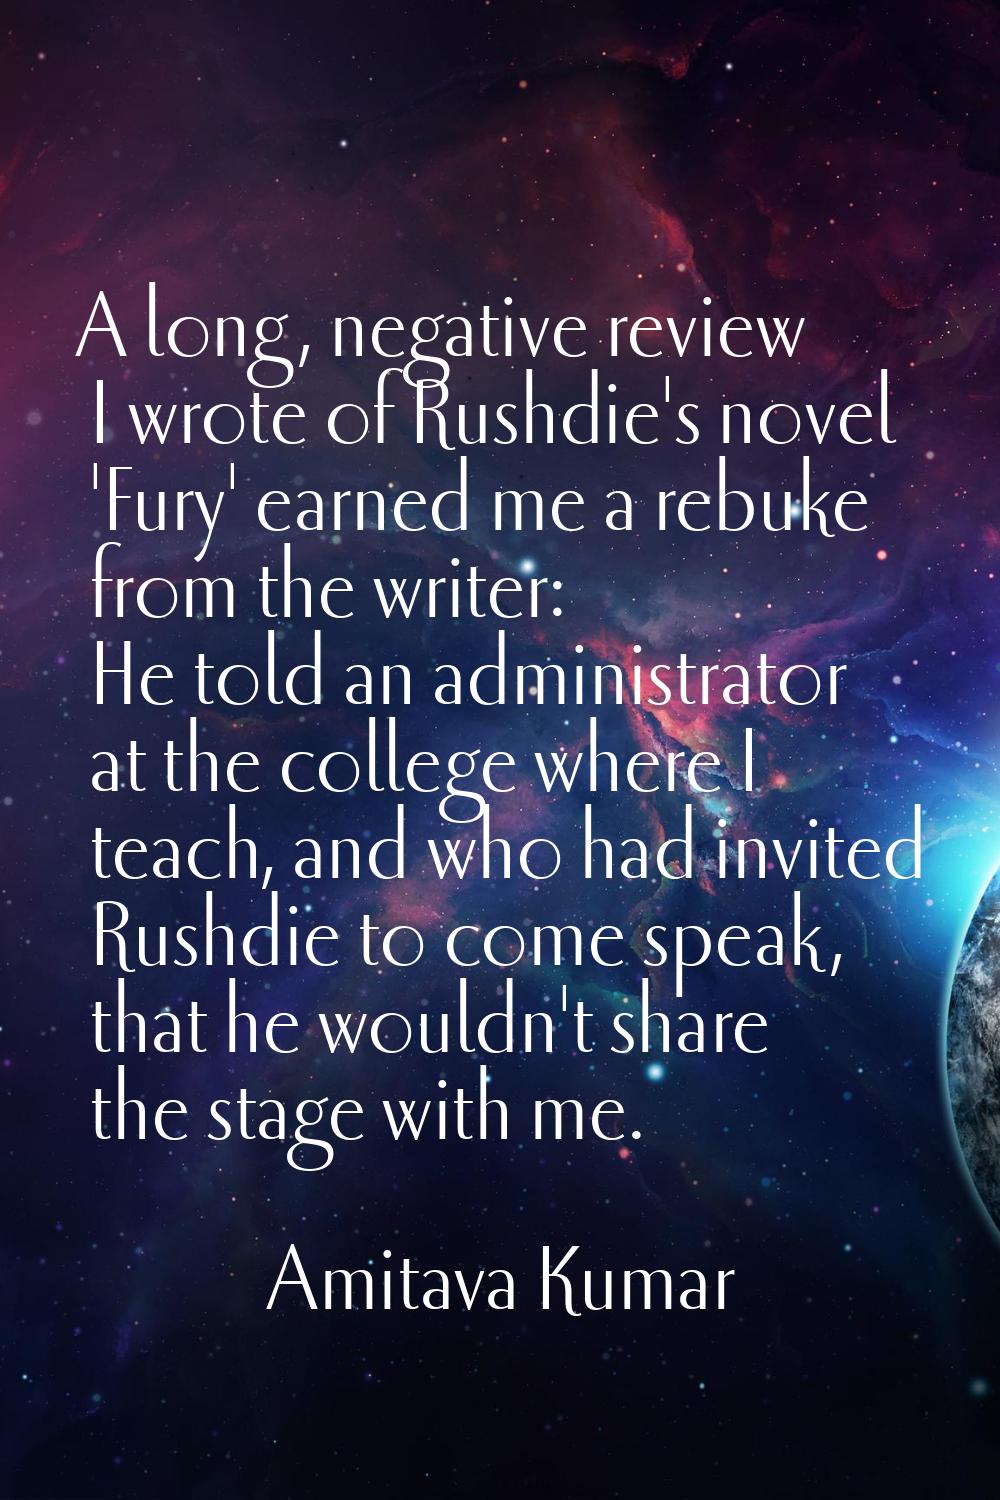 A long, negative review I wrote of Rushdie's novel 'Fury' earned me a rebuke from the writer: He to